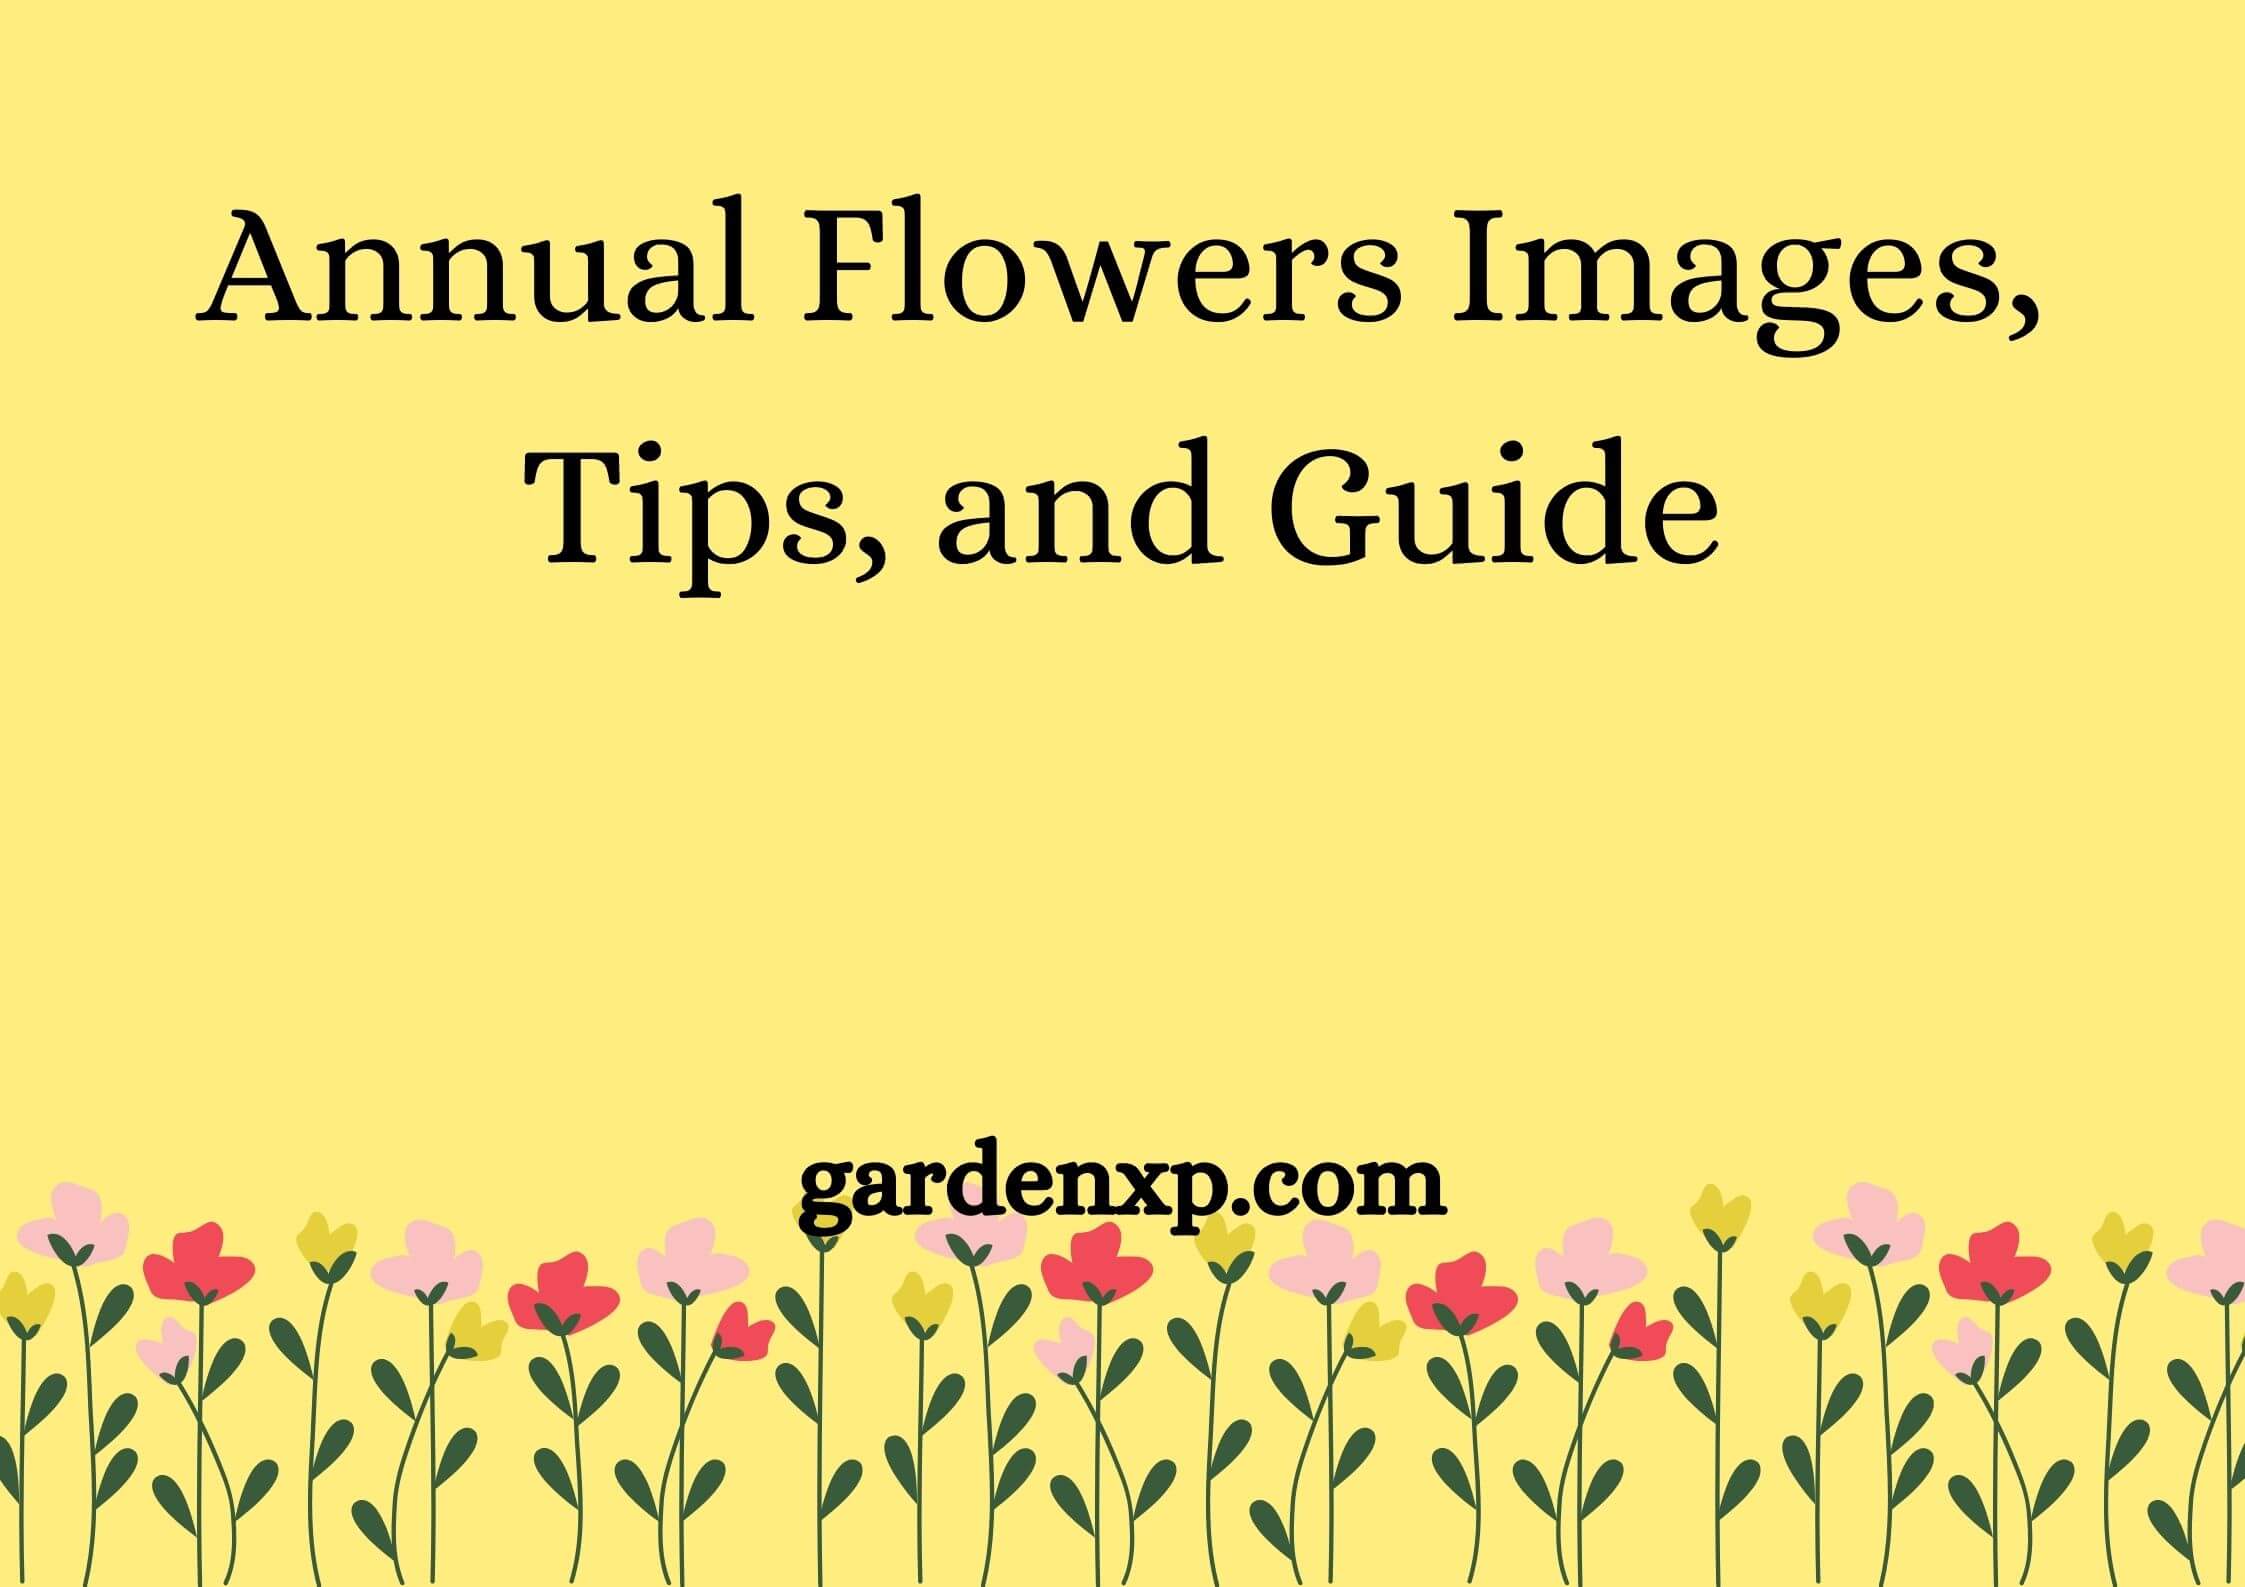 Annual Flowers Images, Tips, and Guide